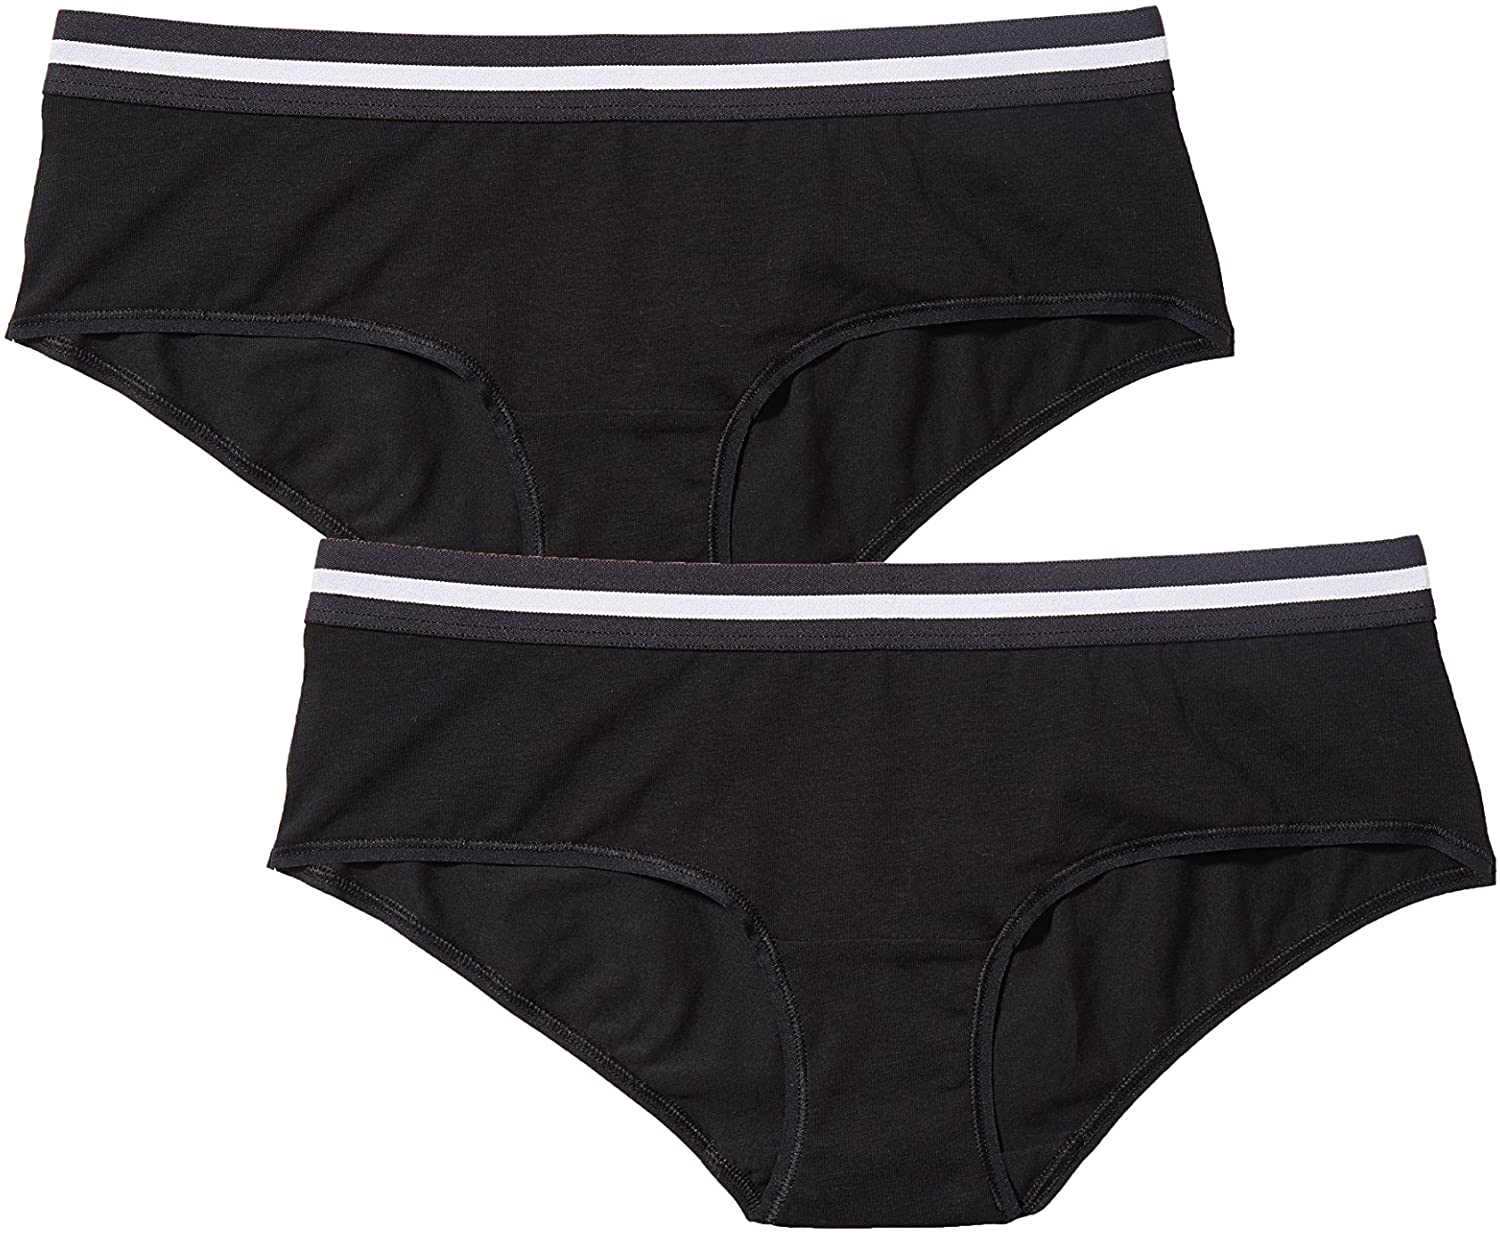 Price:$3.11    Amazon Brand - Iris & Lilly Women's Sporty Hipster Panty, 2-Pack  Clothing